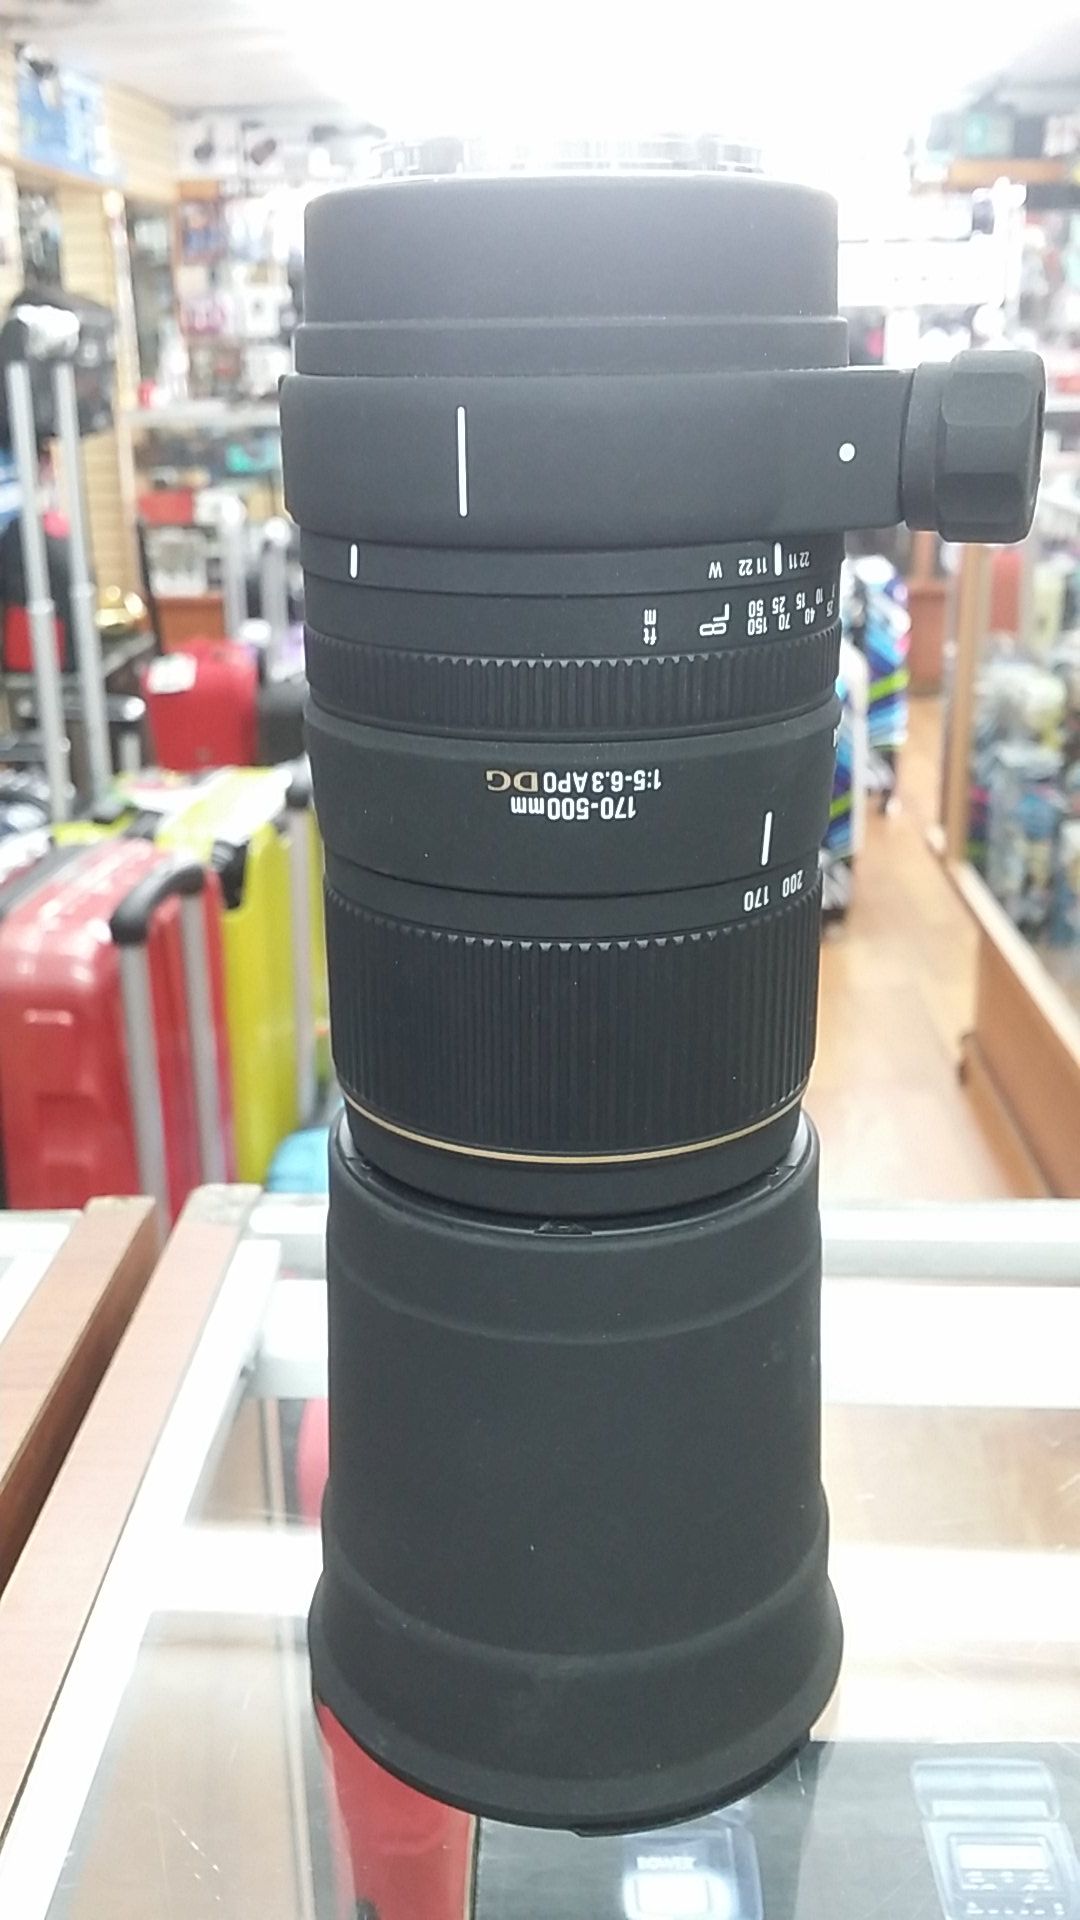 SIGMA 170-500mm f/5-6.3 DG RF APO ASPHERICAL ULTRA TELEPHOTO ZOOM LENS FOR CANON DSLR AND SLR CAMERAS FOR SALE!ONLY MANUAL FOCUS....